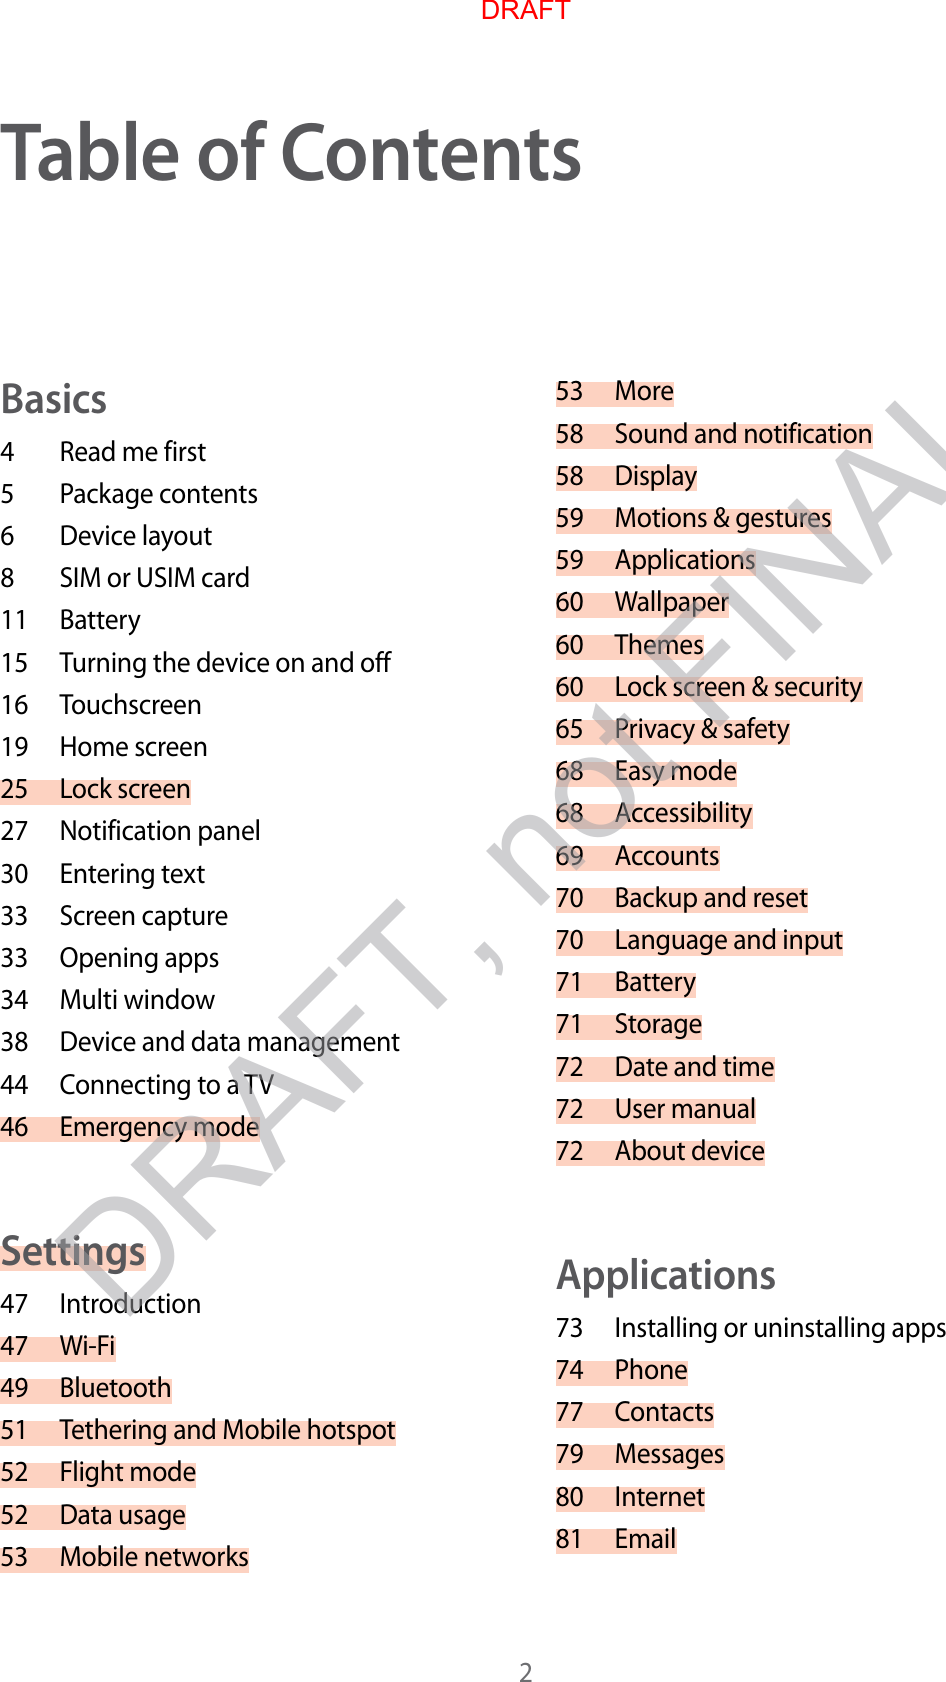 2Table of C on t entsBasics4  Read me first5  P ackage conten ts6  Device lay out8  SIM or USIM card11 Battery15 Turning the device on and off16 Touchscreen19 Home screen25 Lock scr een27 Notification panel30 Entering text33 Screen capture33 Opening apps34 Multi window38 Device and data management44 Connecting to a TV46 Emergency modeSettings47 Introduction47 Wi-Fi49 Bluetooth51 Tethering and Mobile hotspot52 Fligh t mode52 Data usage53 Mobile networks53 More58 Sound and notification58 Display59 Motions &amp; gestures59 Applications60 Wallpaper60 Themes60 Lock scr een &amp; security65 Privacy &amp; safety68 Easy mode68 Accessibility69 Accounts70 Backup and reset70 Language and input71 Battery71 Storage72 Date and time72 User manual72 About deviceApplications73 Installing or uninstalling apps74 Phone77 Contacts79 Messages80 Internet81 EmailDRAFT, not FINALDRAFT